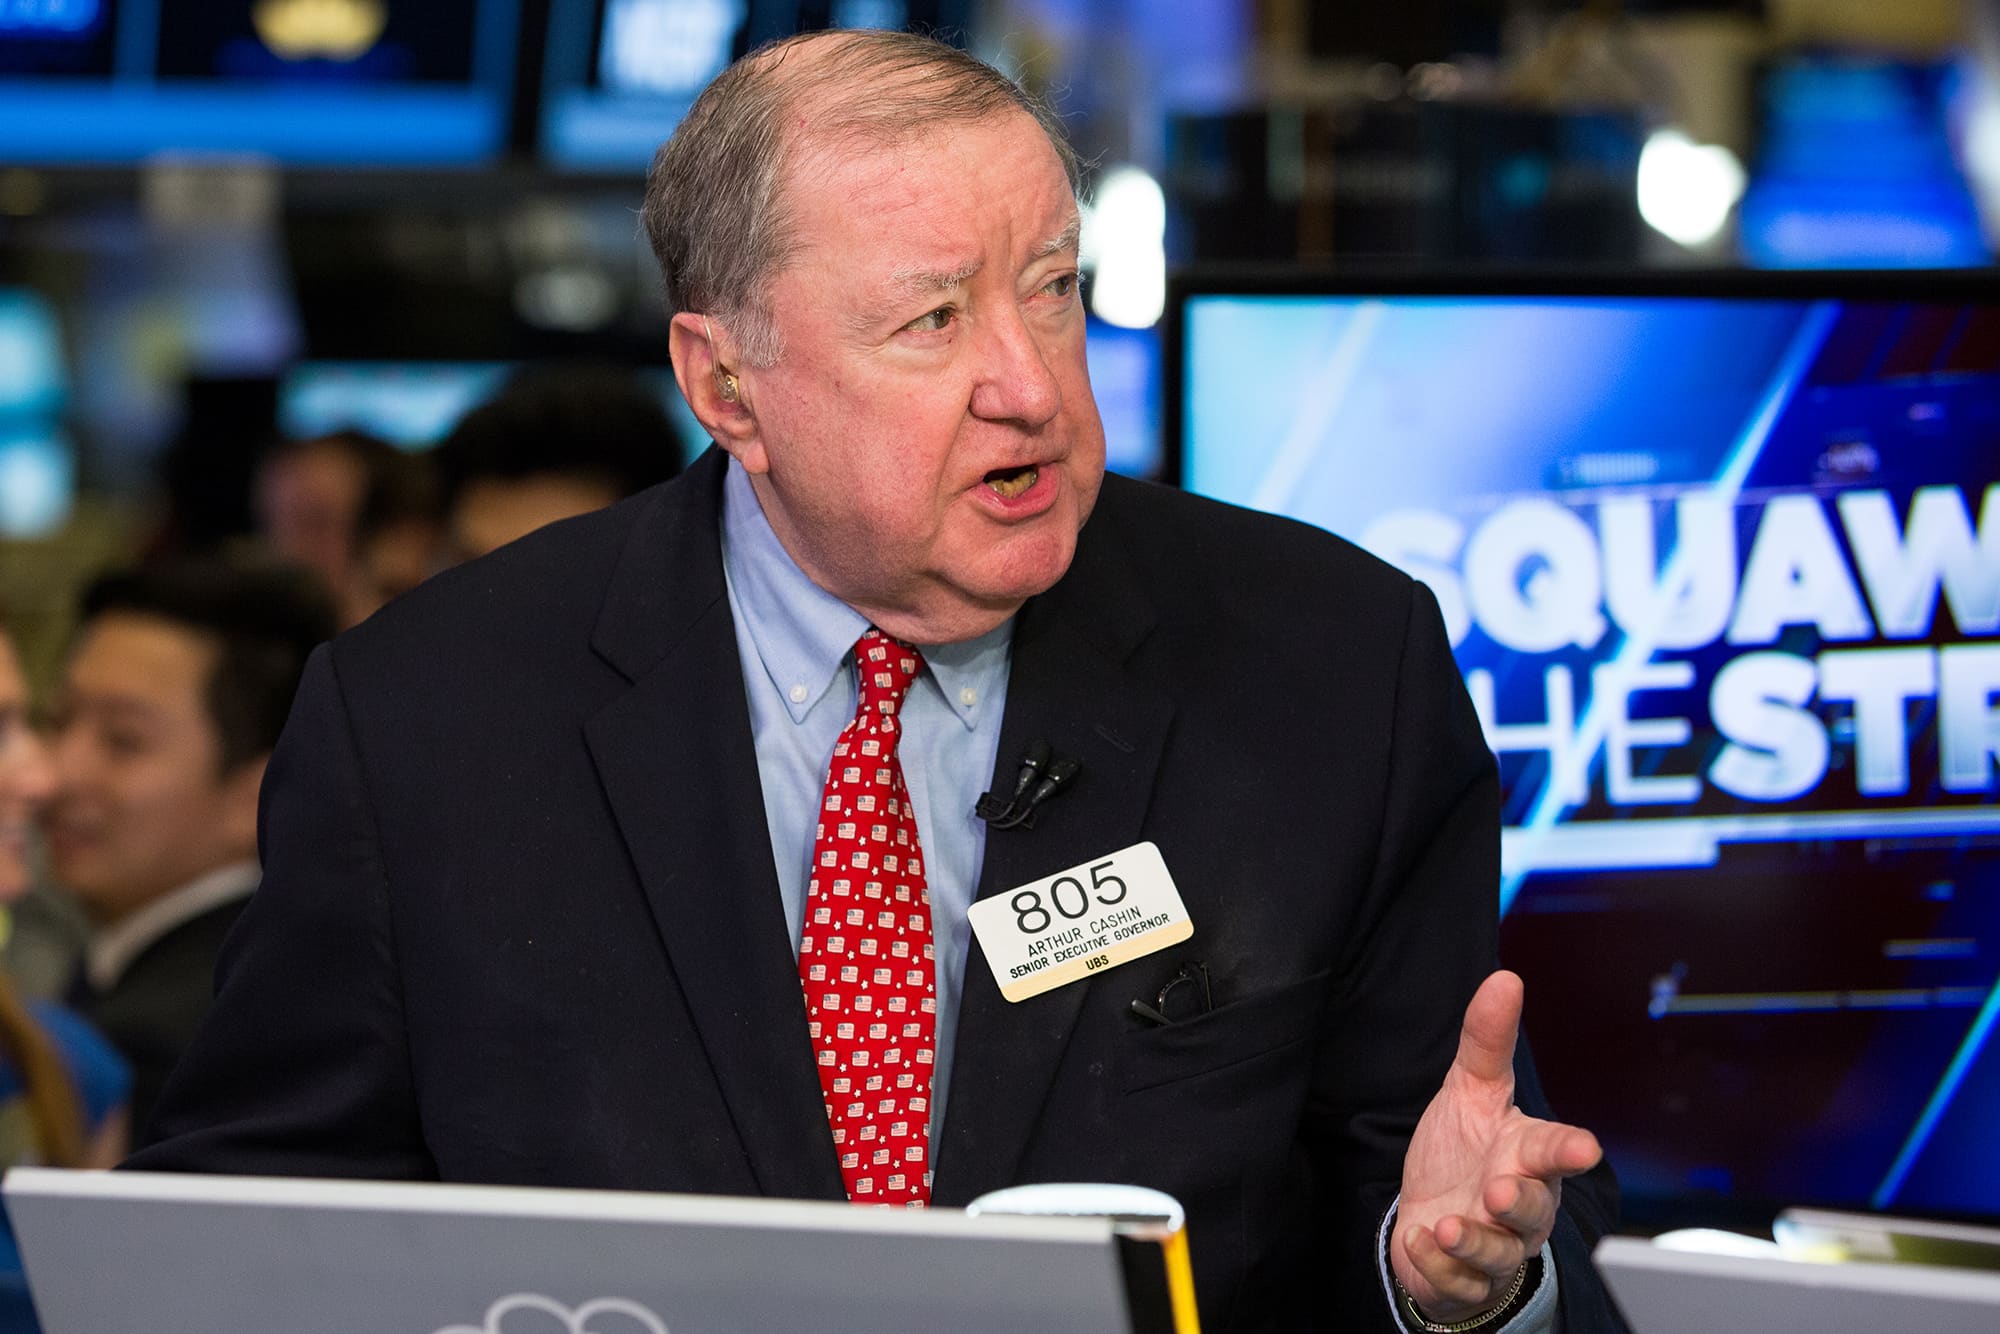 Art Cashin says markets will likely re-test the lows after Thursday's 'borderline miraculous' rally